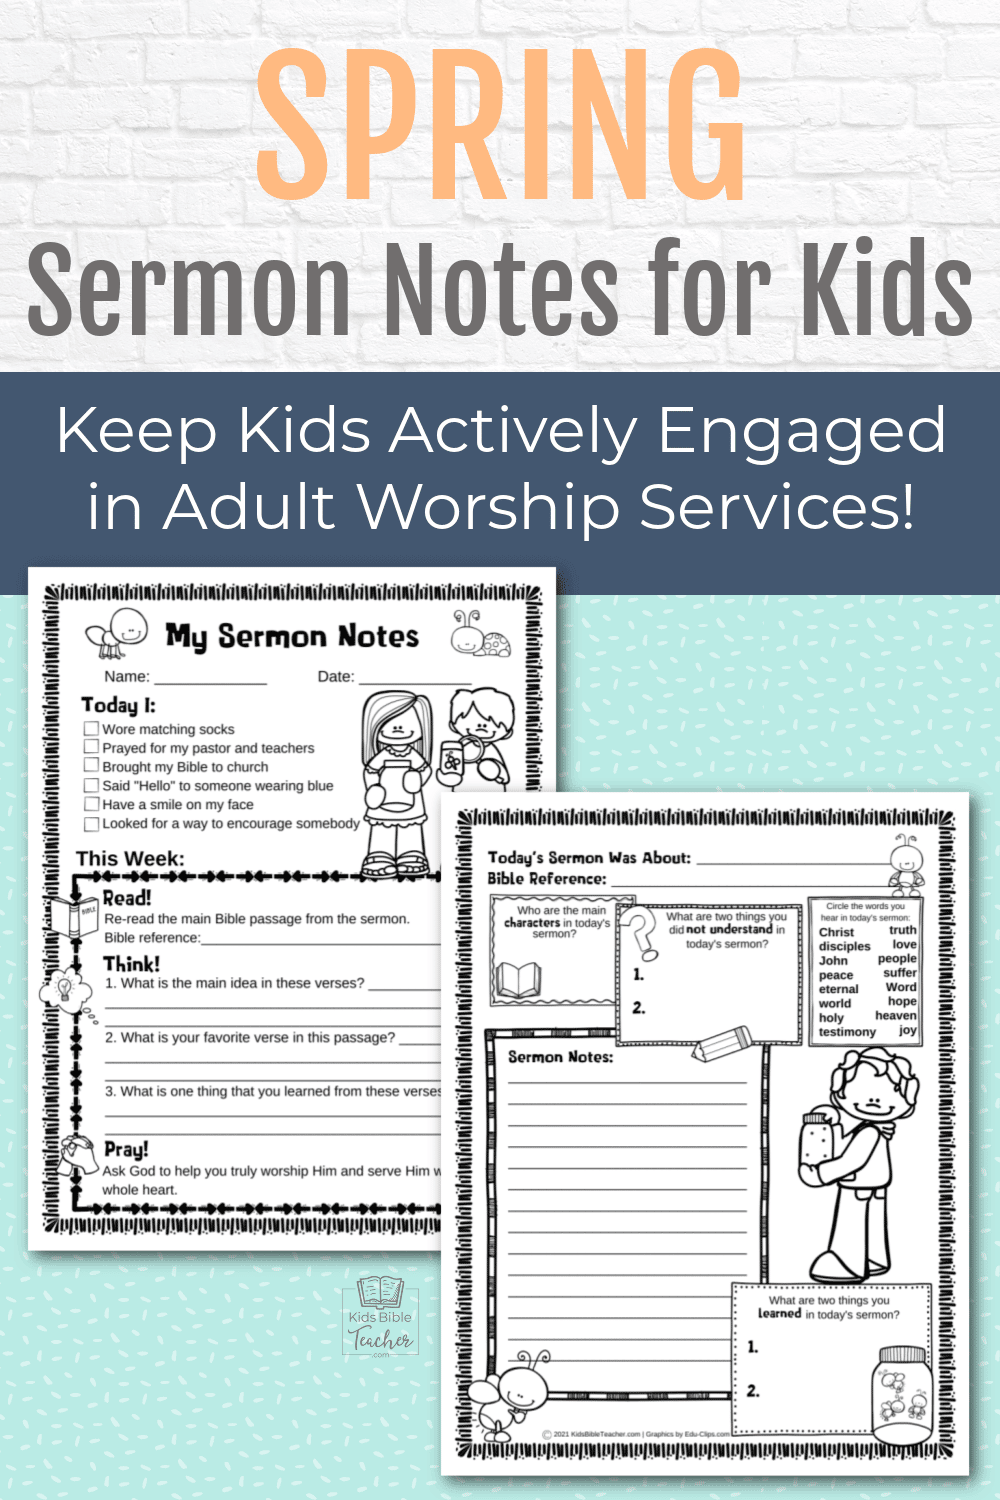 Help your kids feel welcome in the adult church service with this fun printable spring sermon notes page - perfect to keep kids quietly engaged and actively participating!